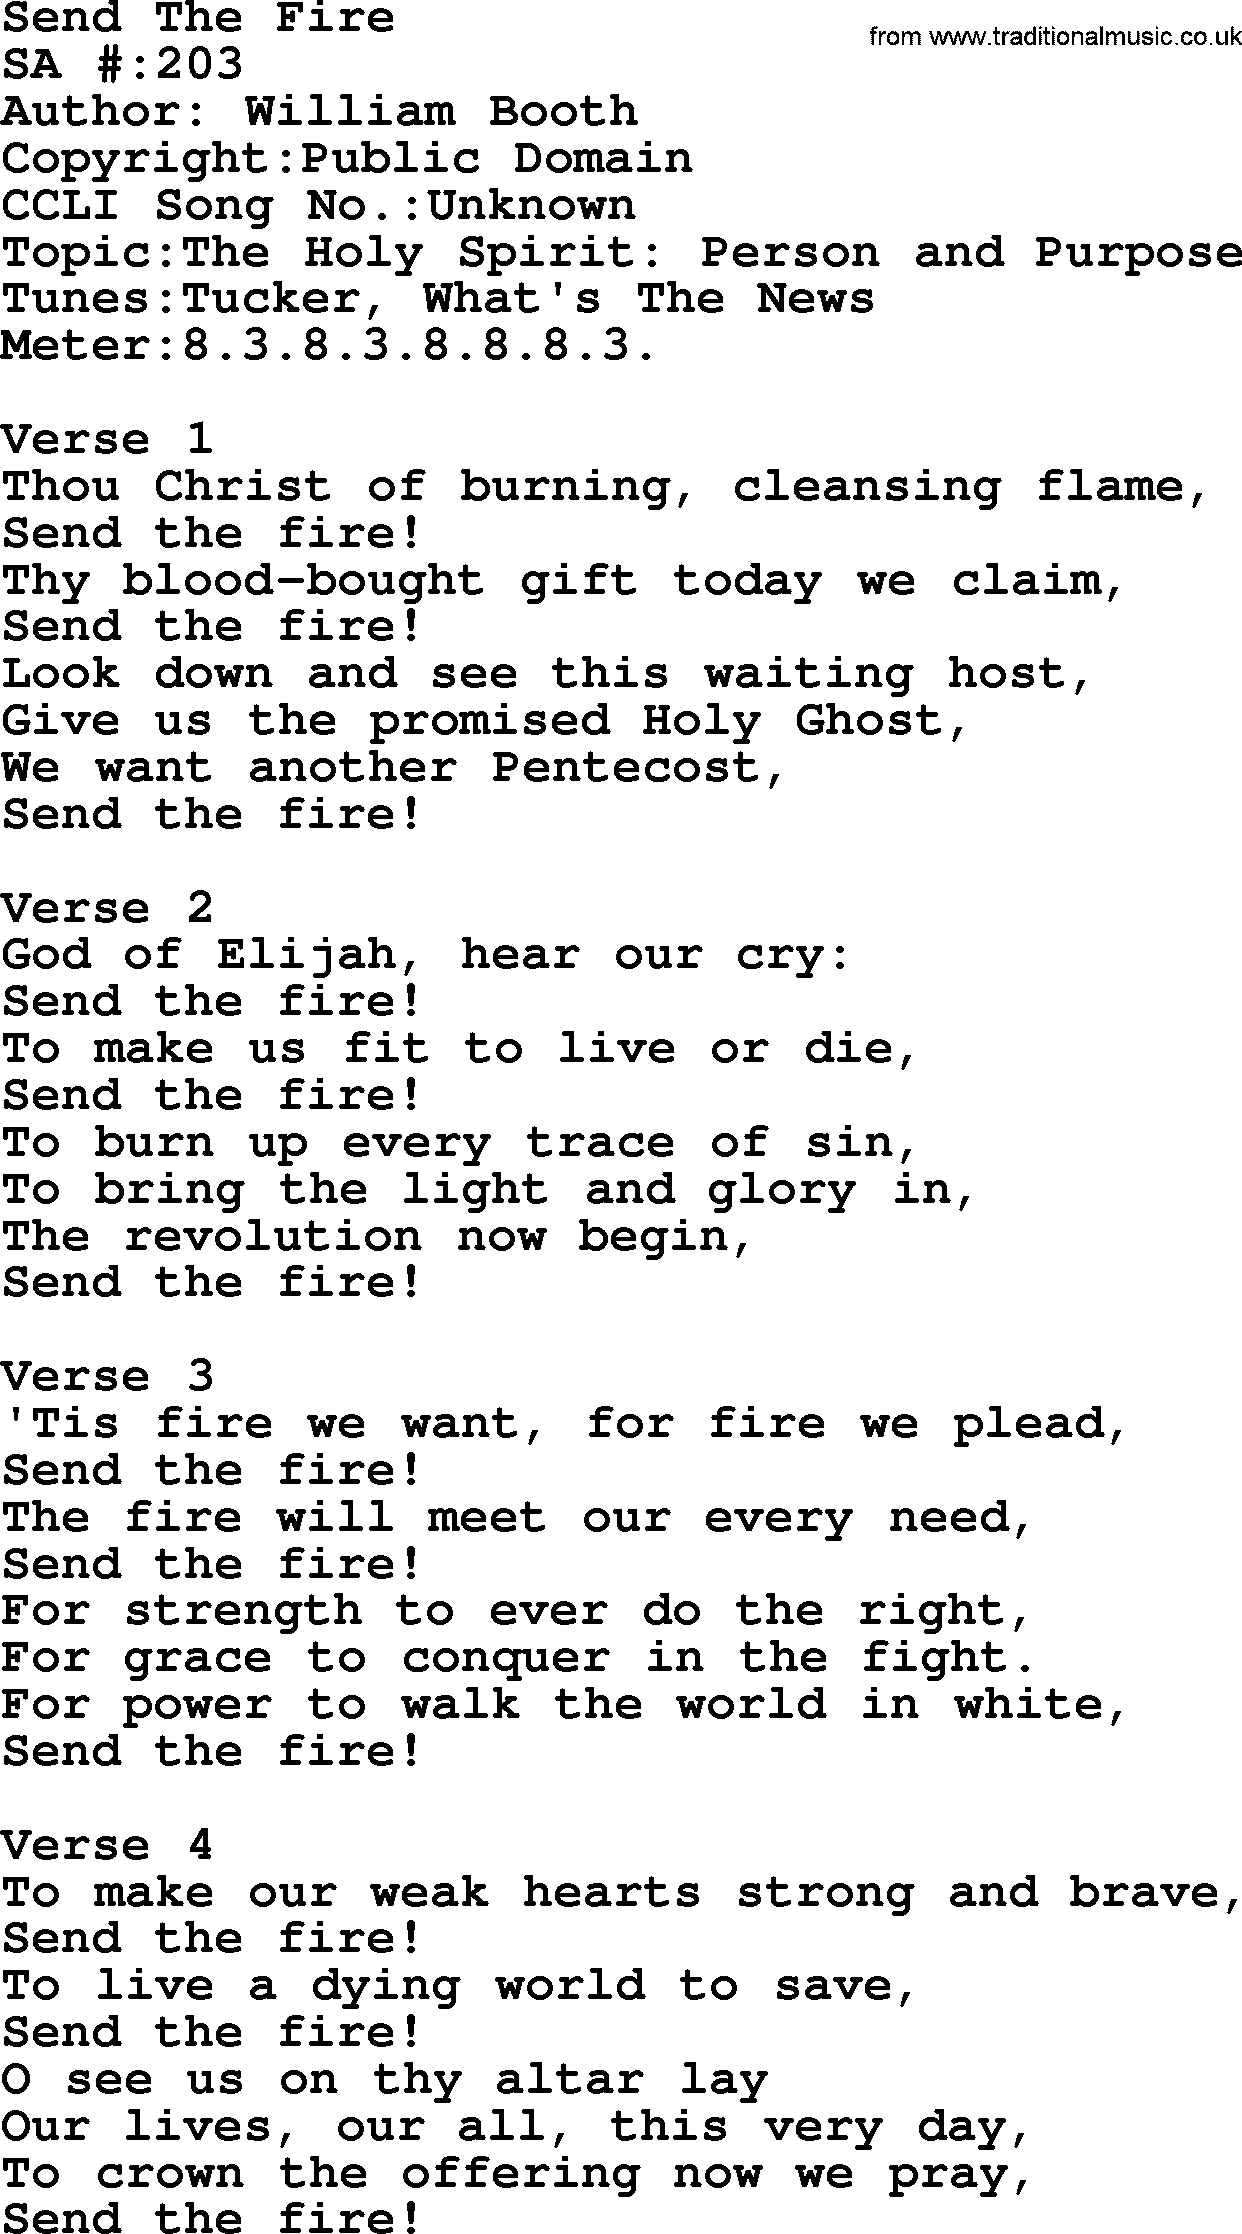 Salvation Army Hymnal, title: Send The Fire, with lyrics and PDF,